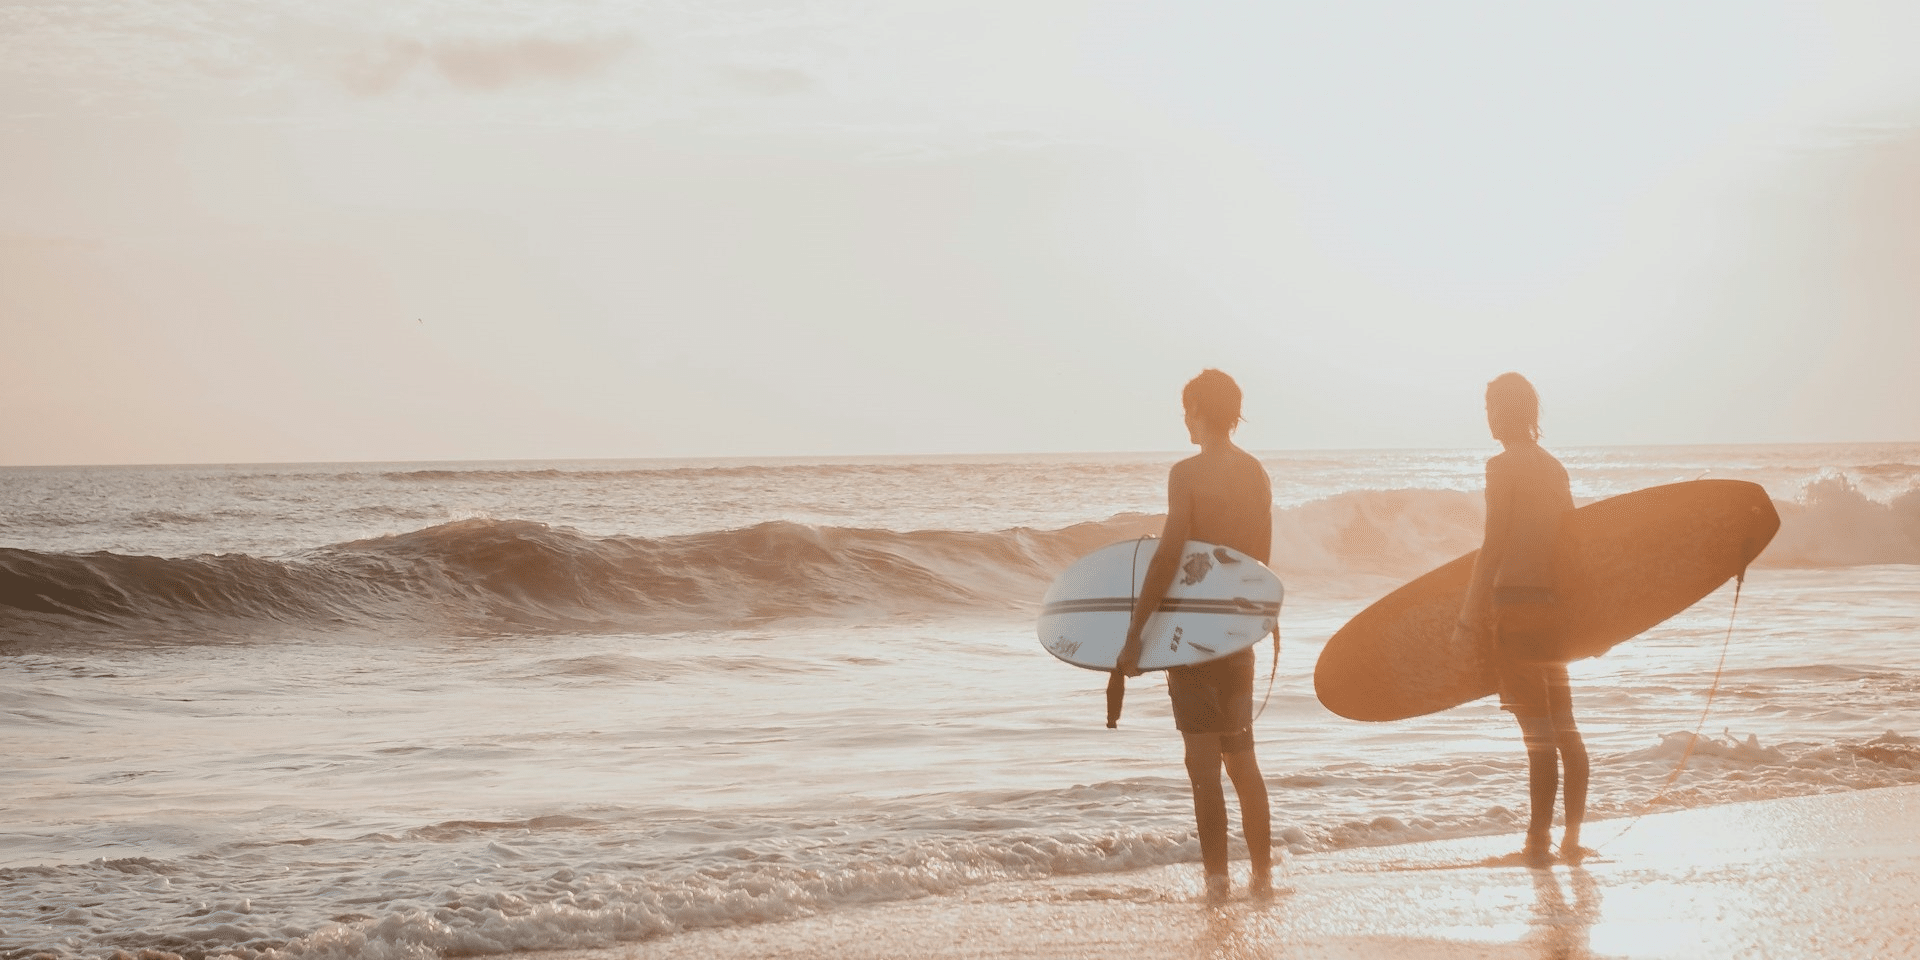 The Underrated Sport of Surfing: A Wave of Excitement